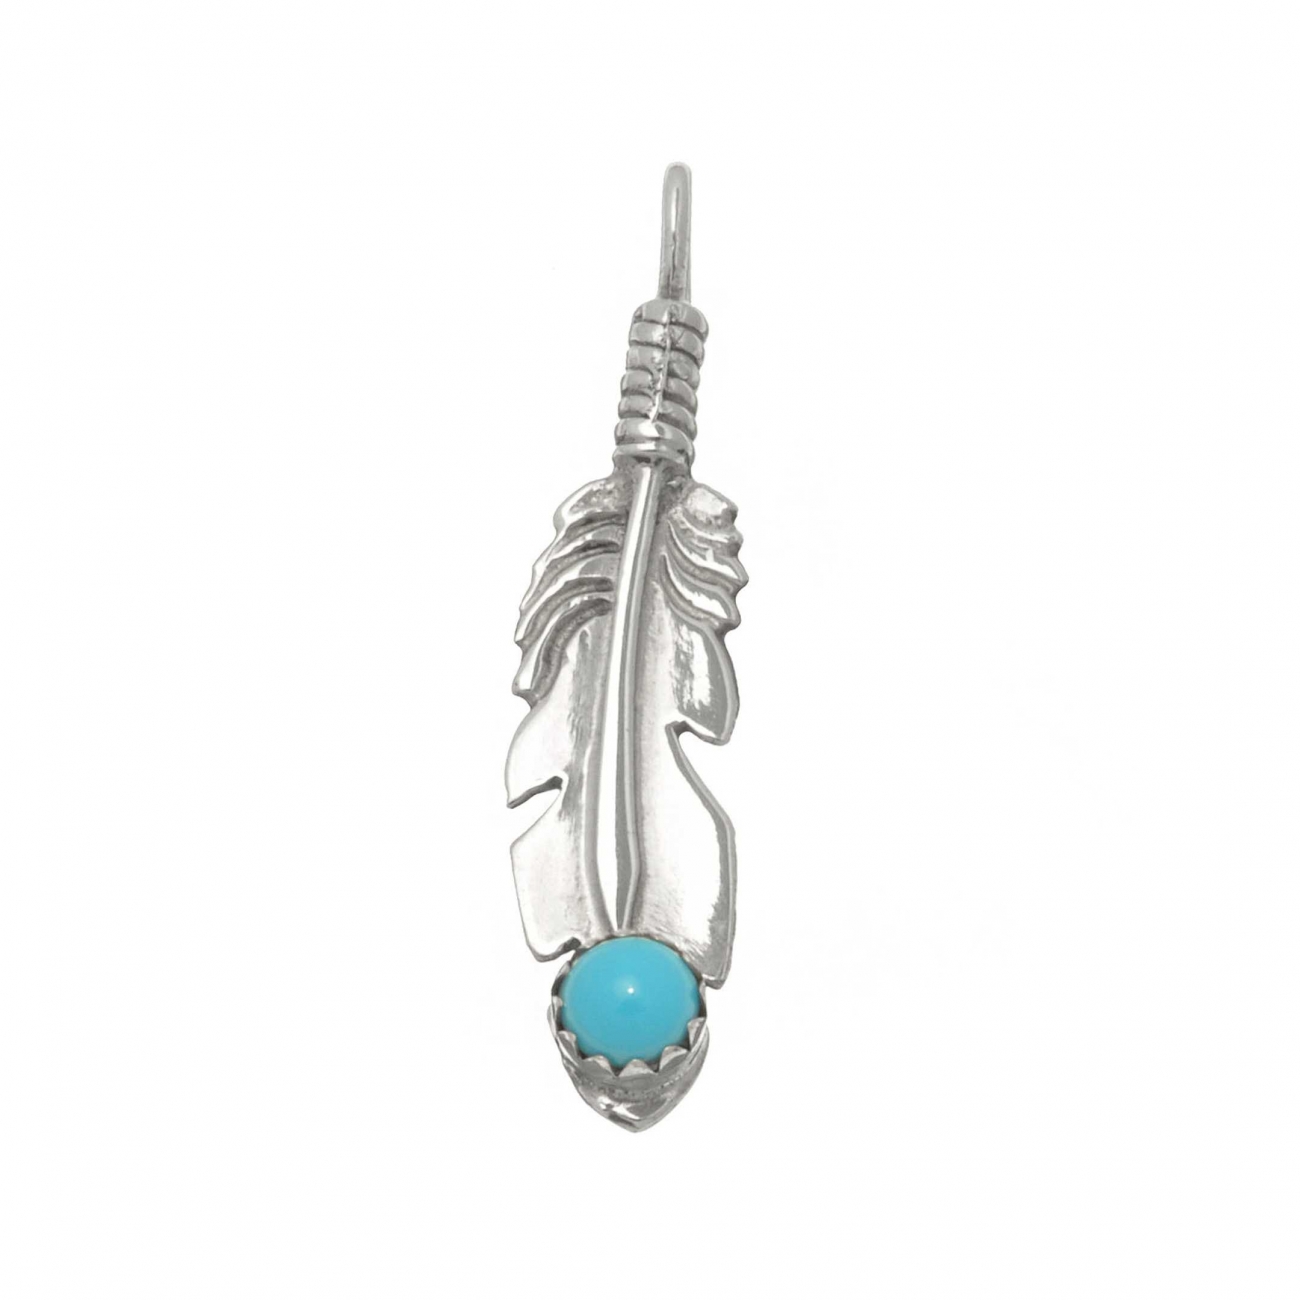 Harpo Paris pendant PEw01 feather in silver and turquoise